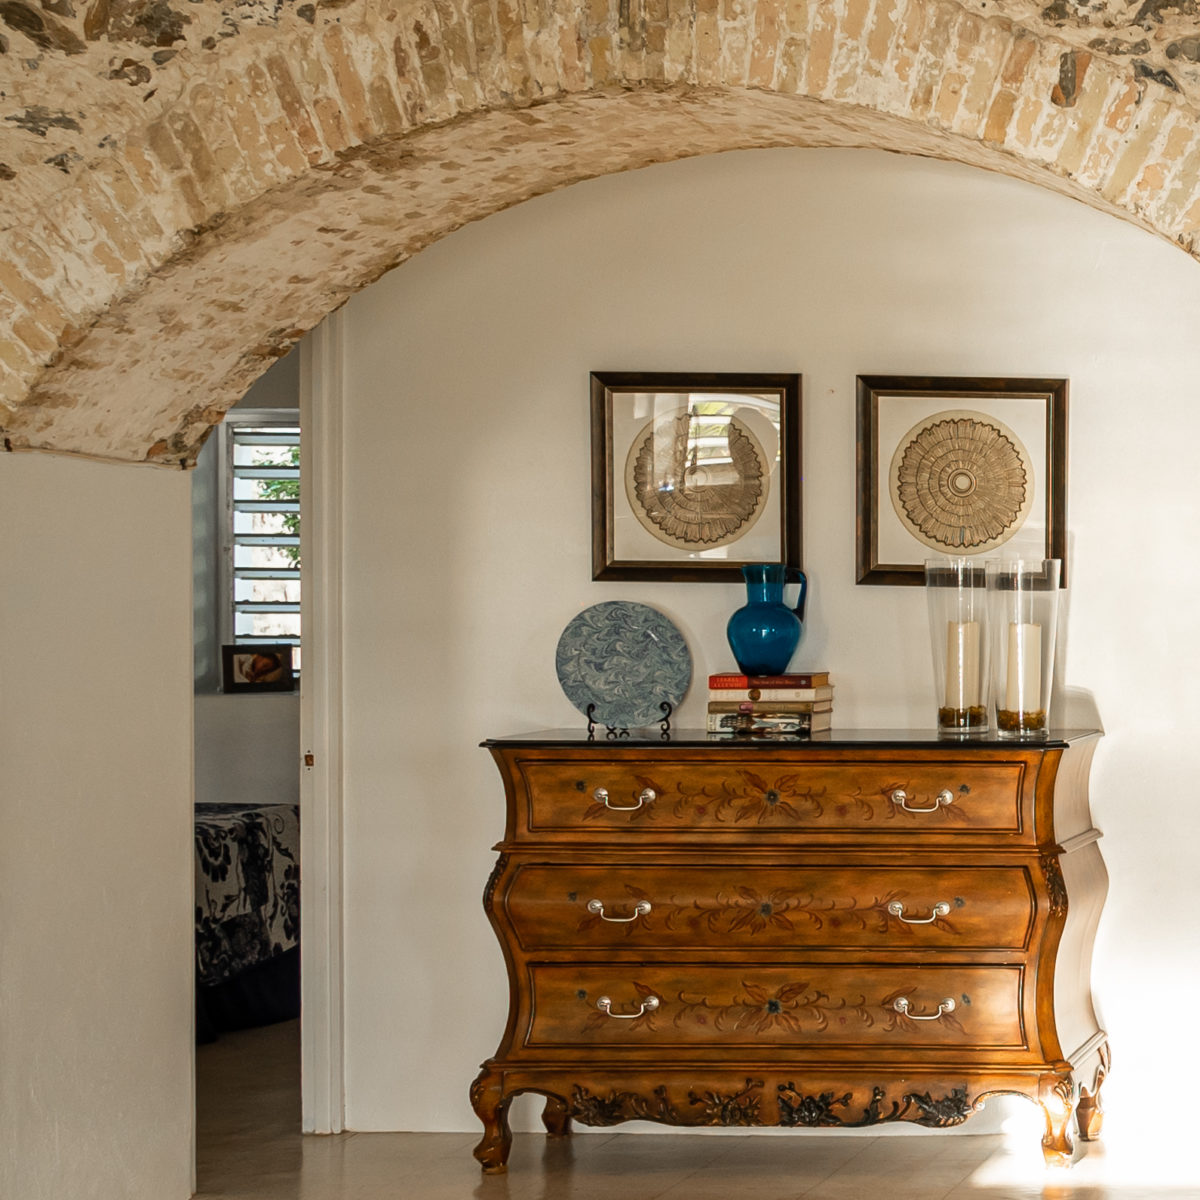 Vintage accents under the arches